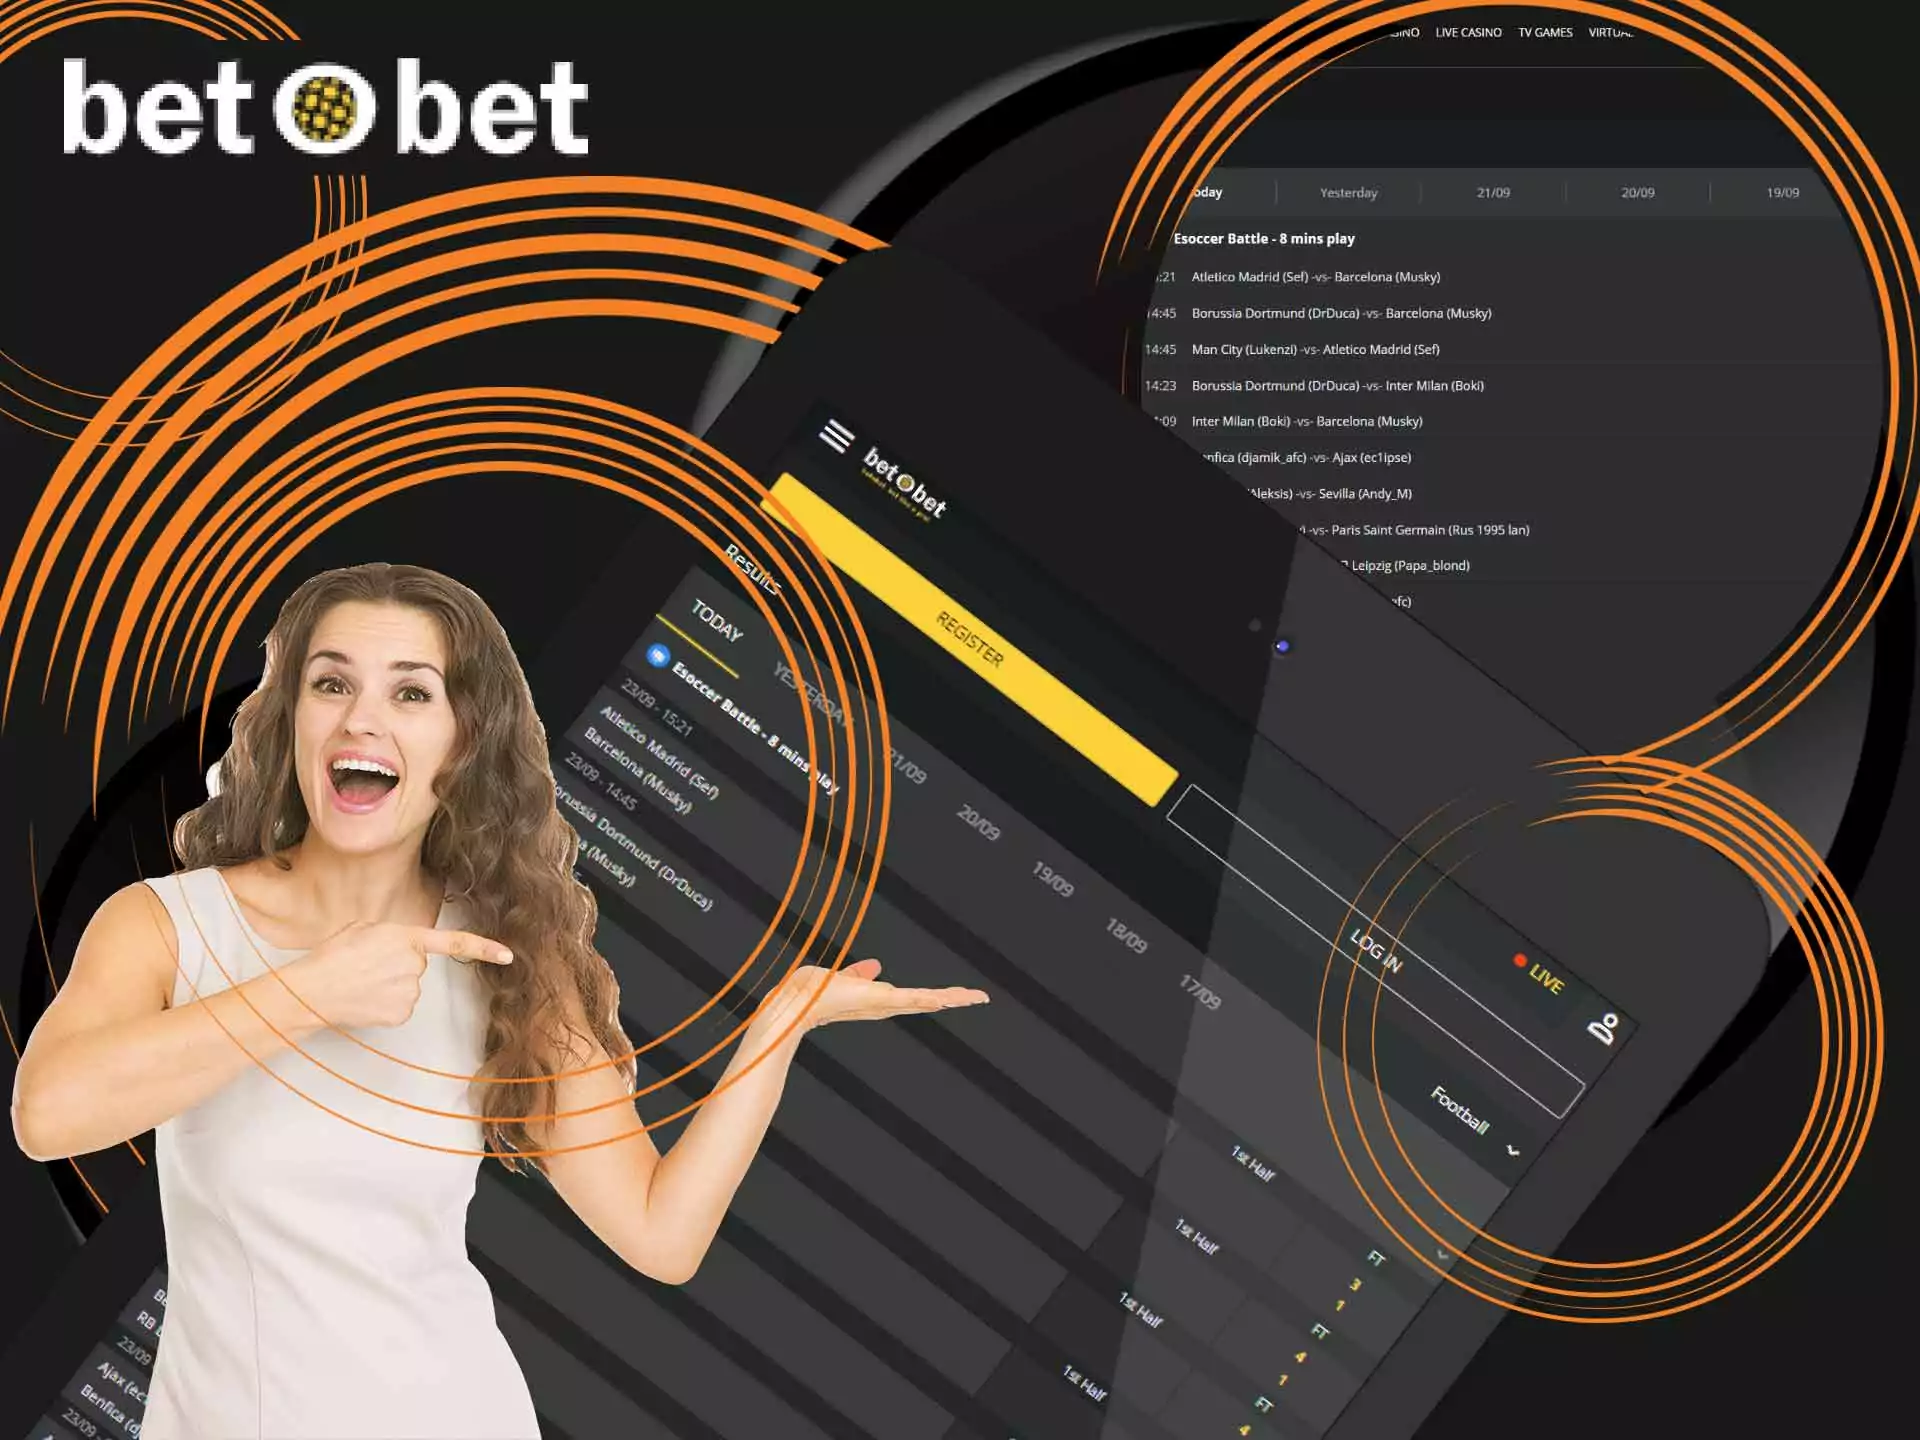 BetOBet is the great mobile app for betting and casino gaming.